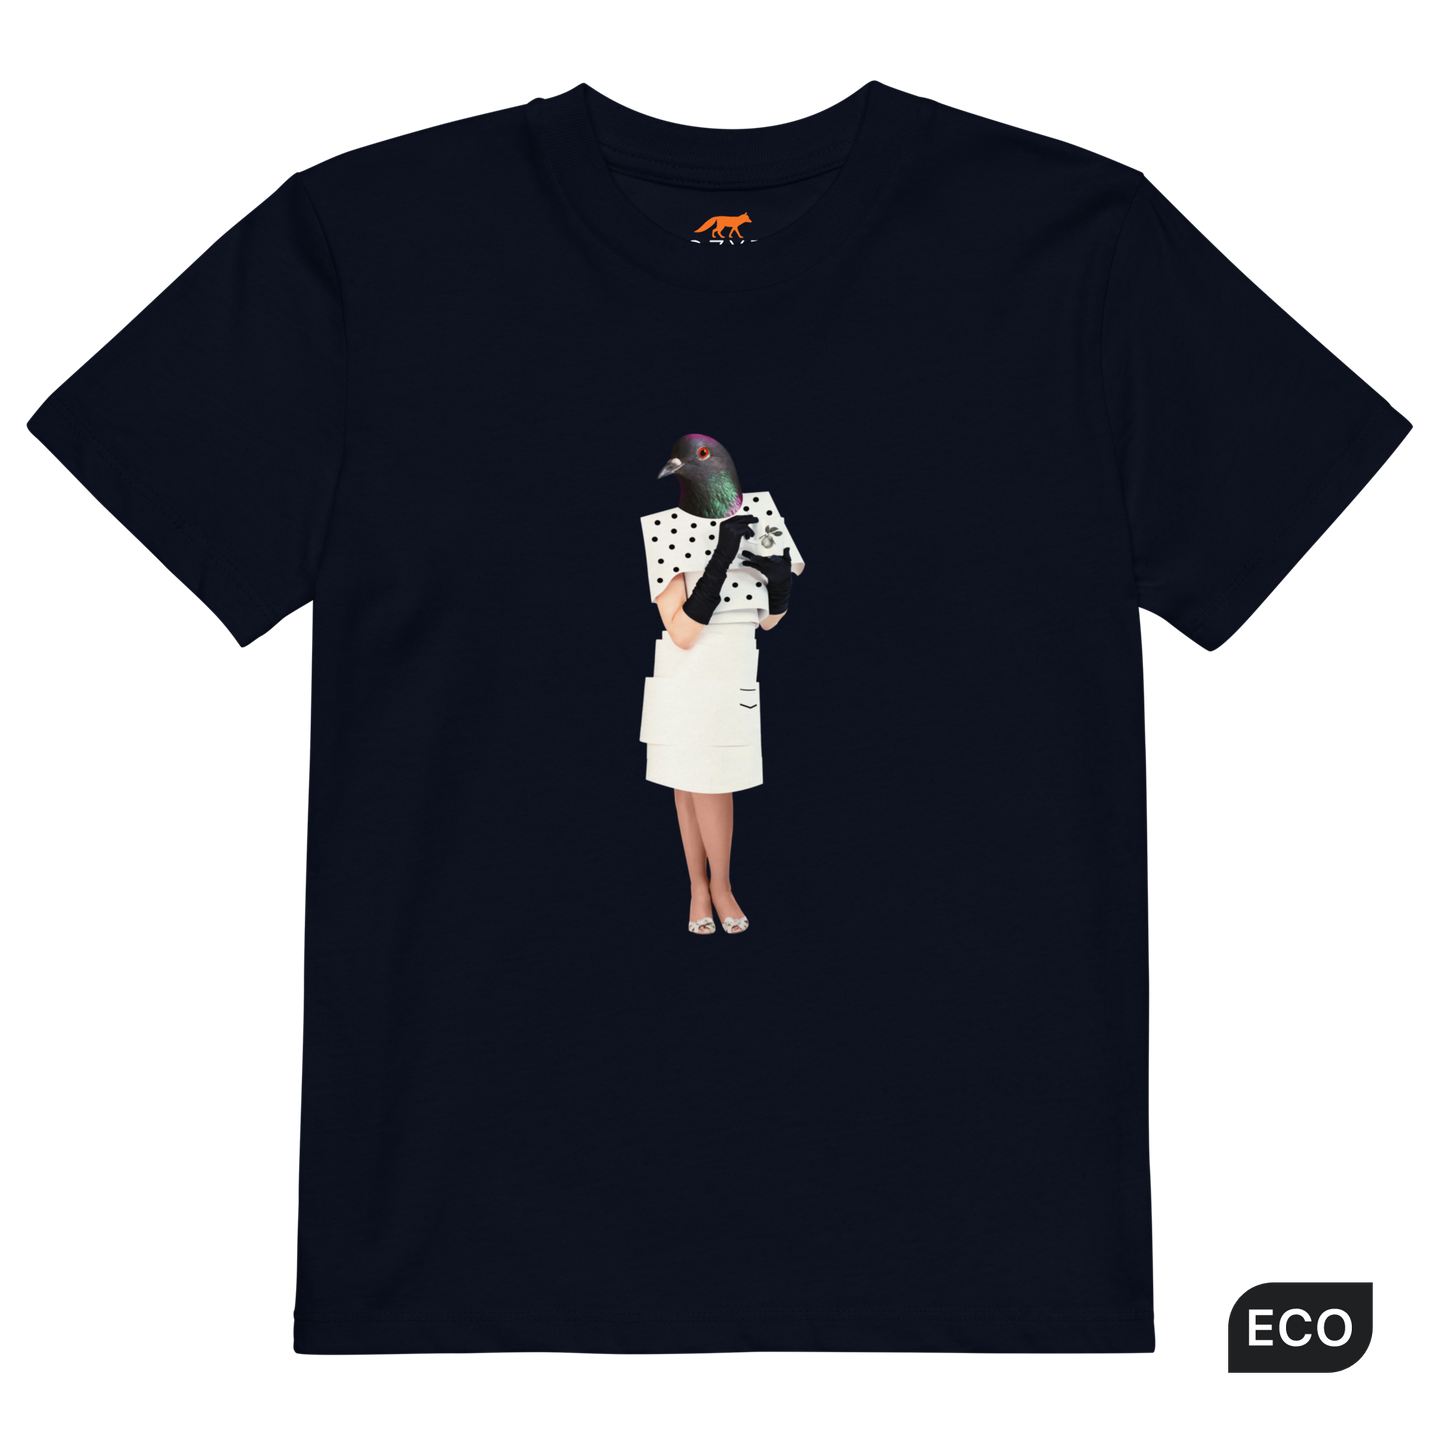 French Navy Anthropomorphic Pigeon Organic Cotton Kids T-Shirt featuring an Anthropomorphic Pigeon graphic on the chest - Kids' Graphic Tees - Funny Animal T-Shirts - Boozy Fox